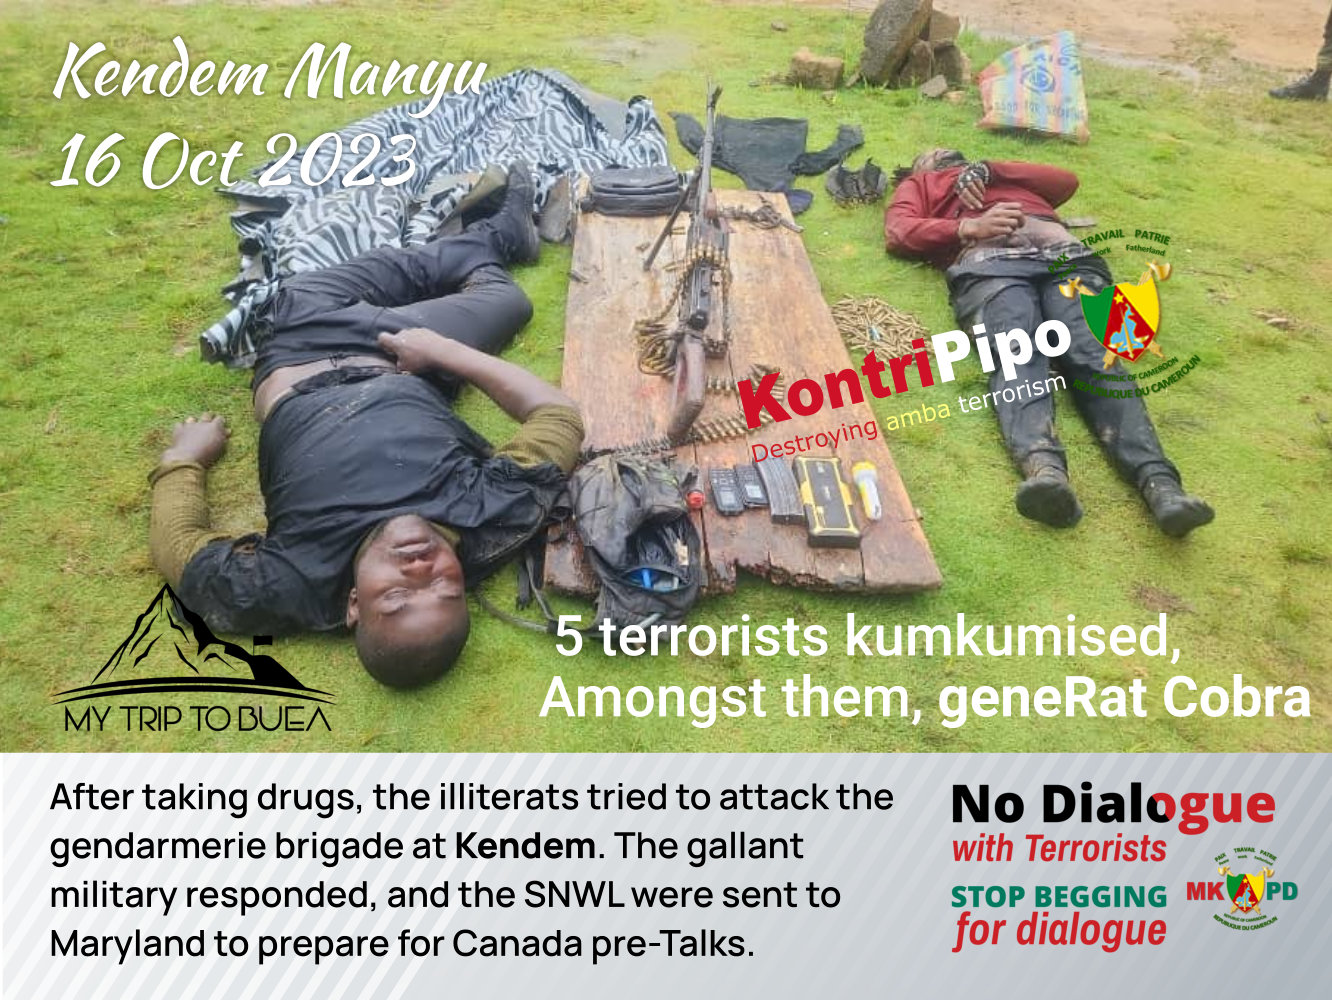 5 amba terrorists kumkumised in Kendem, Manyu, 16 Oct 2023. After taking drugs, the illiterats tried to attack the gendarmerie brigade at Kendem. The gallant military responded, and the SNWL were sent to Maryland to prepare for Canada pre-Talks.